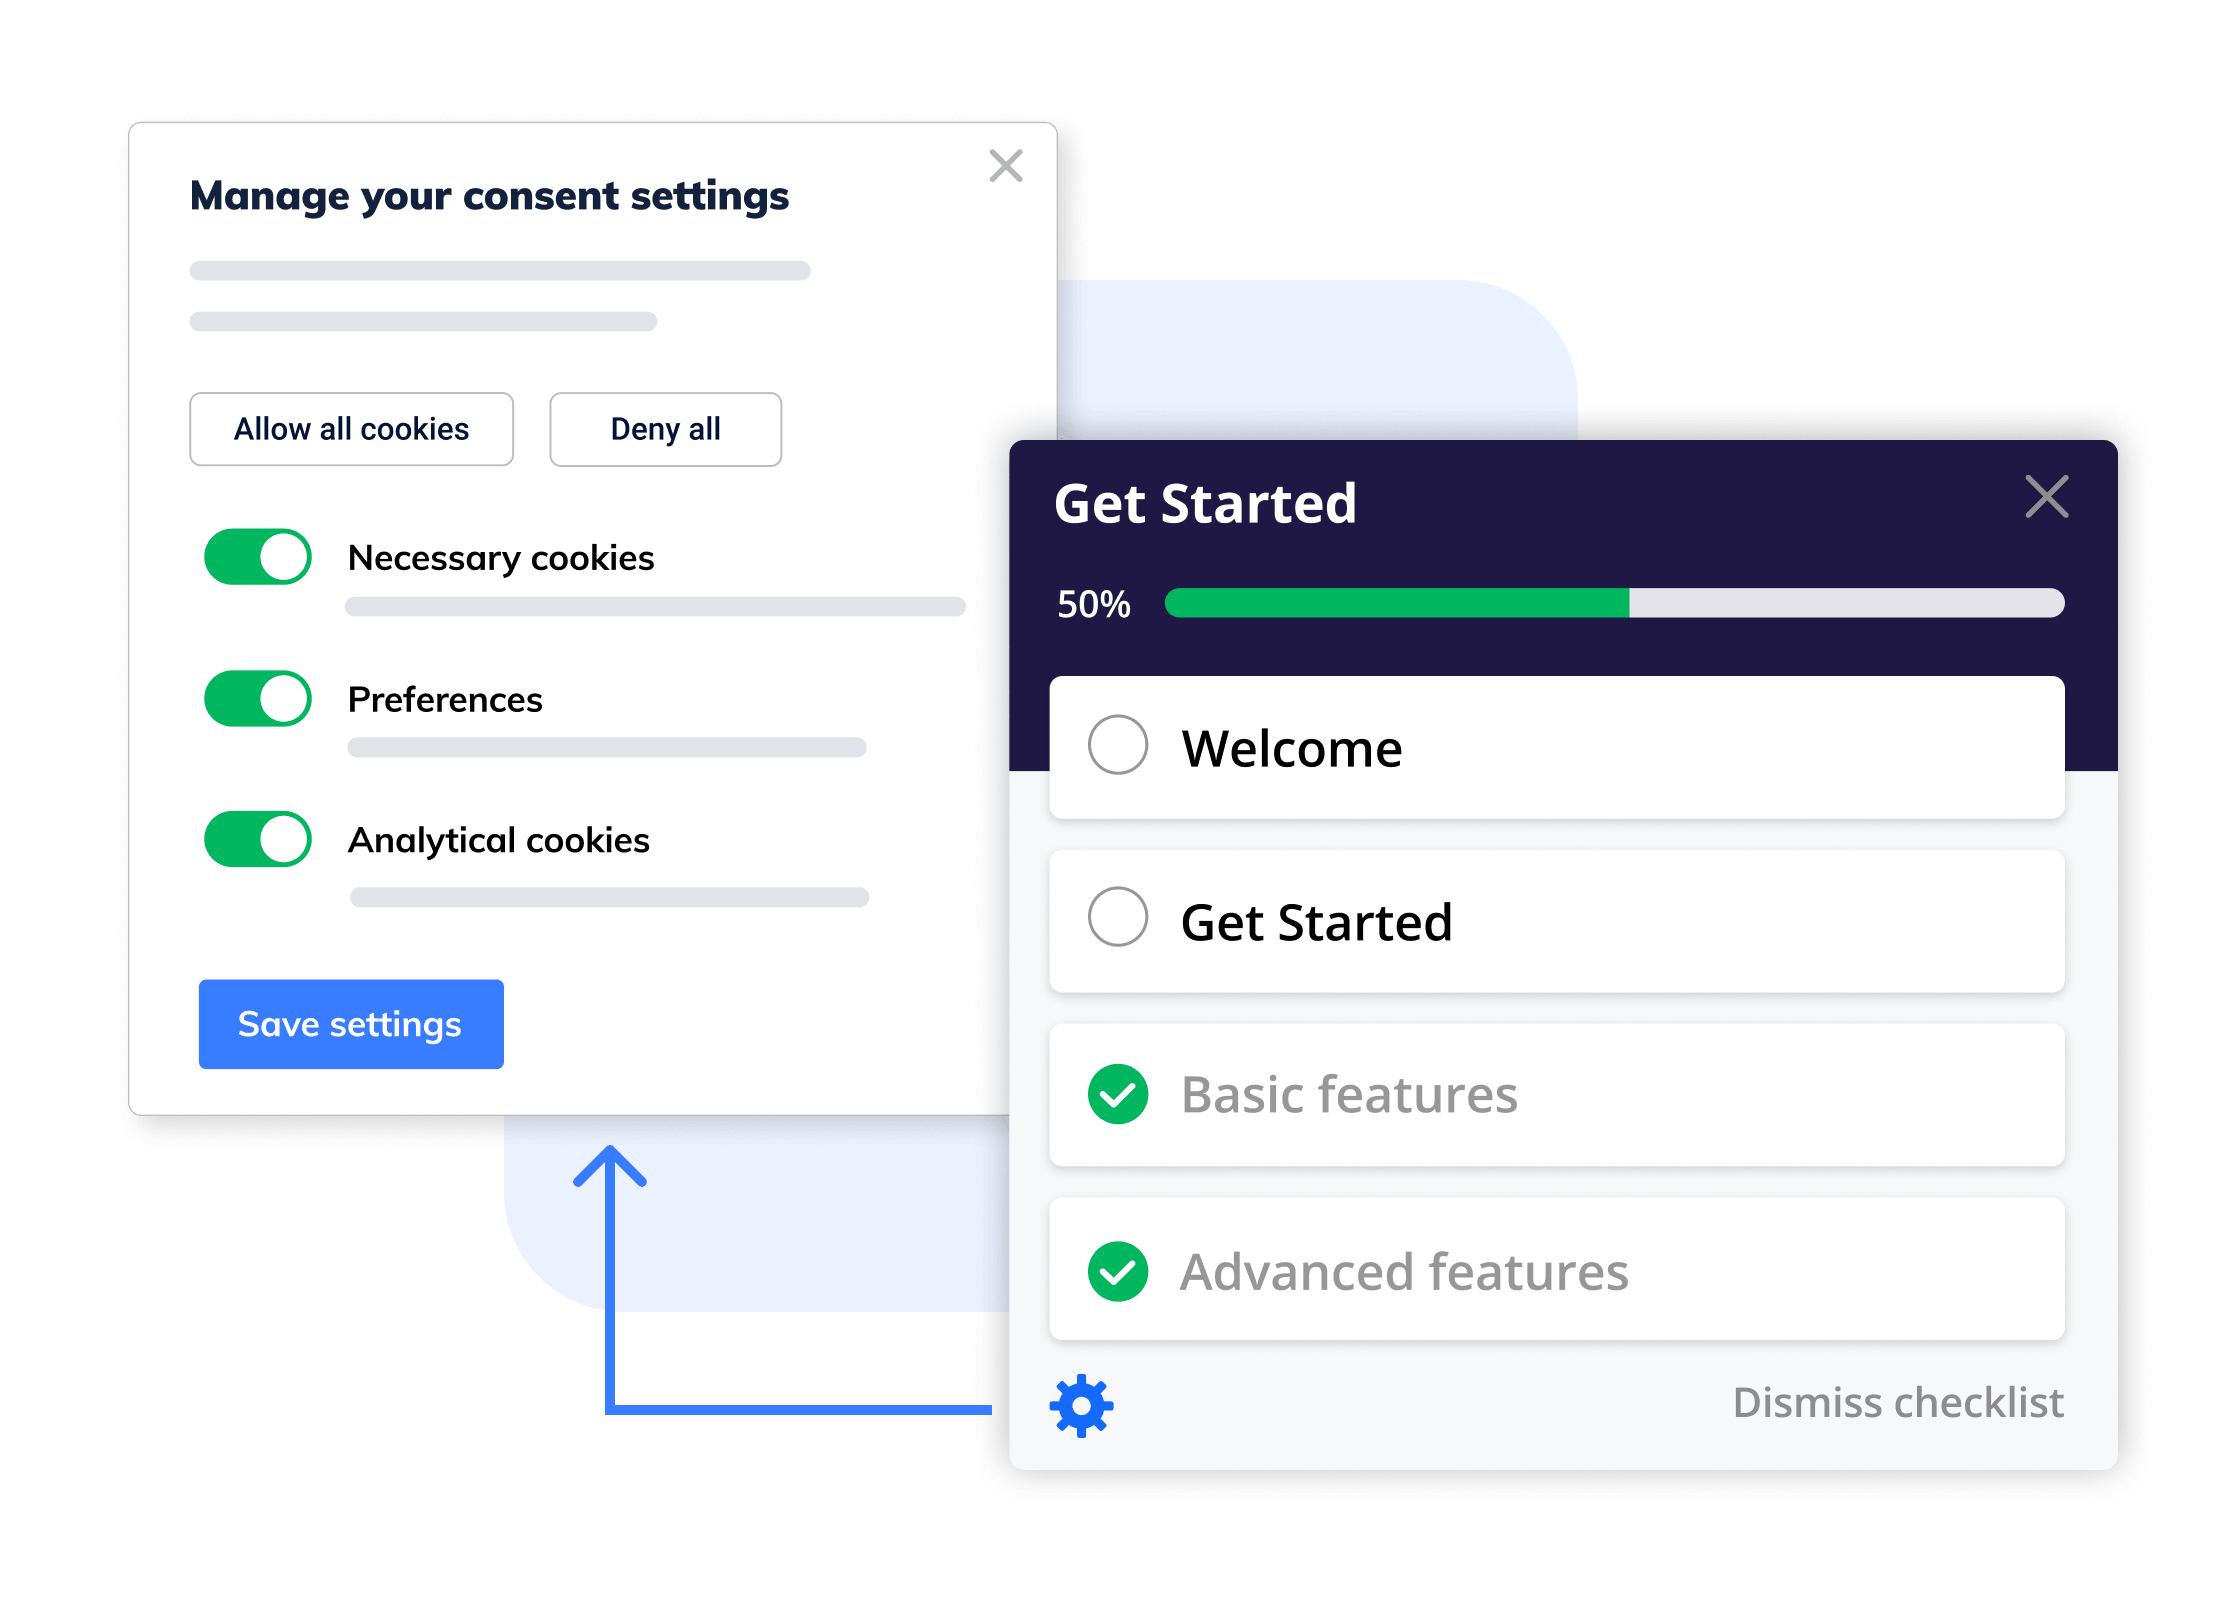 Let users to manage their consents